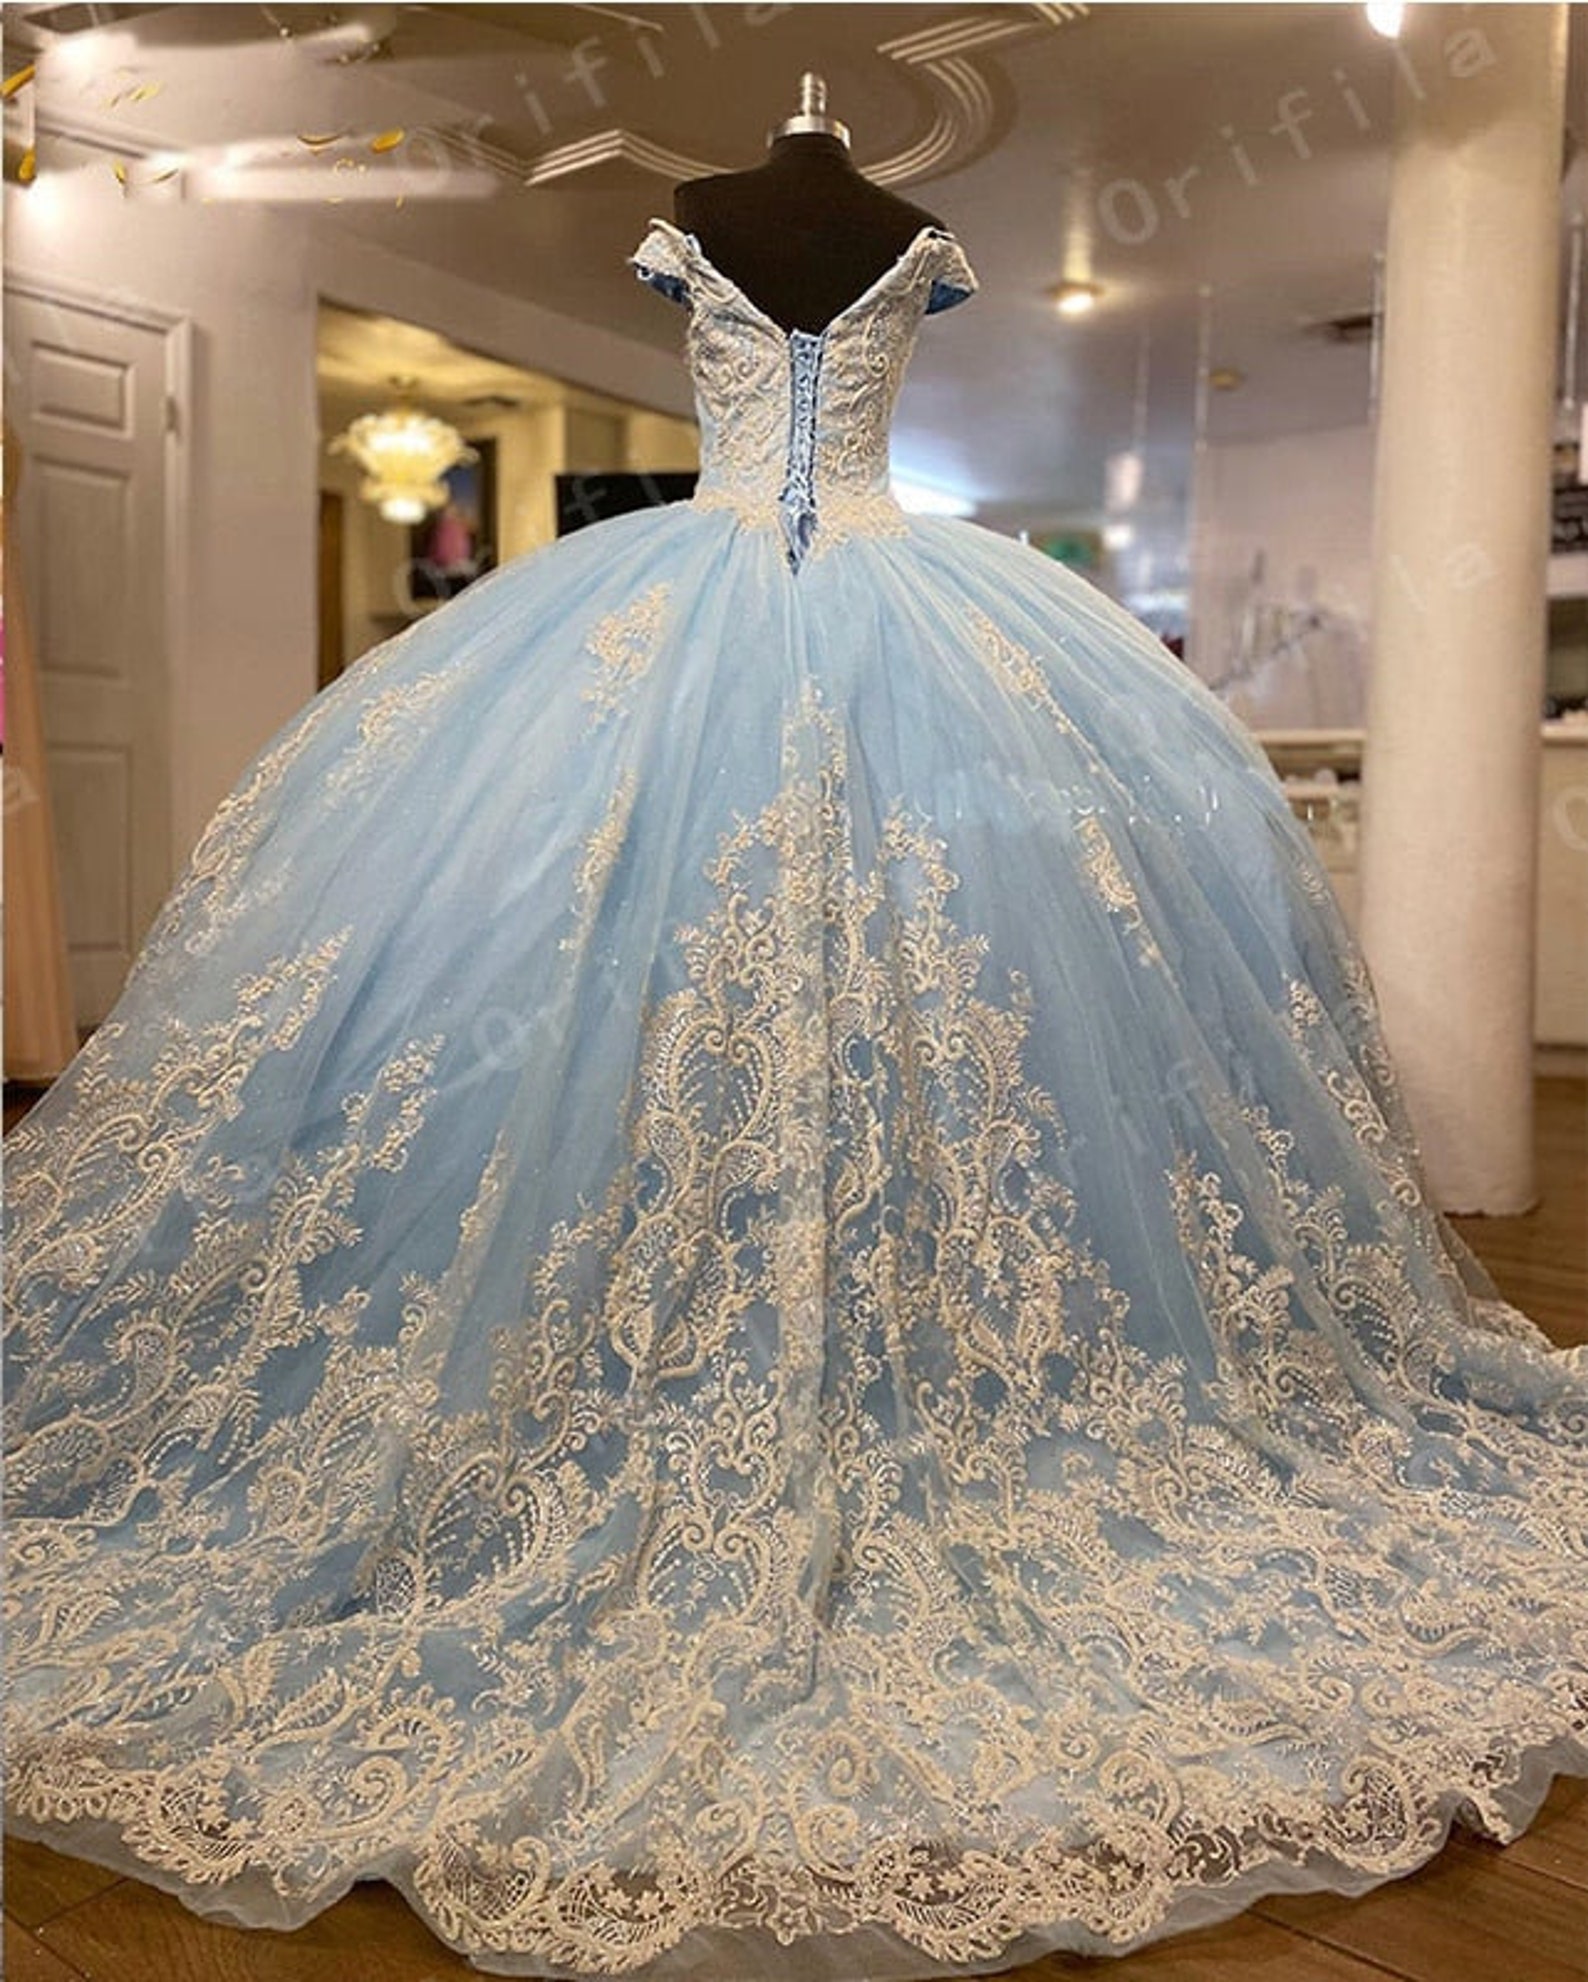 Sky Blue 2021 Ball Gown Quinceanera Dresses Bridal Gowns off | Etsy